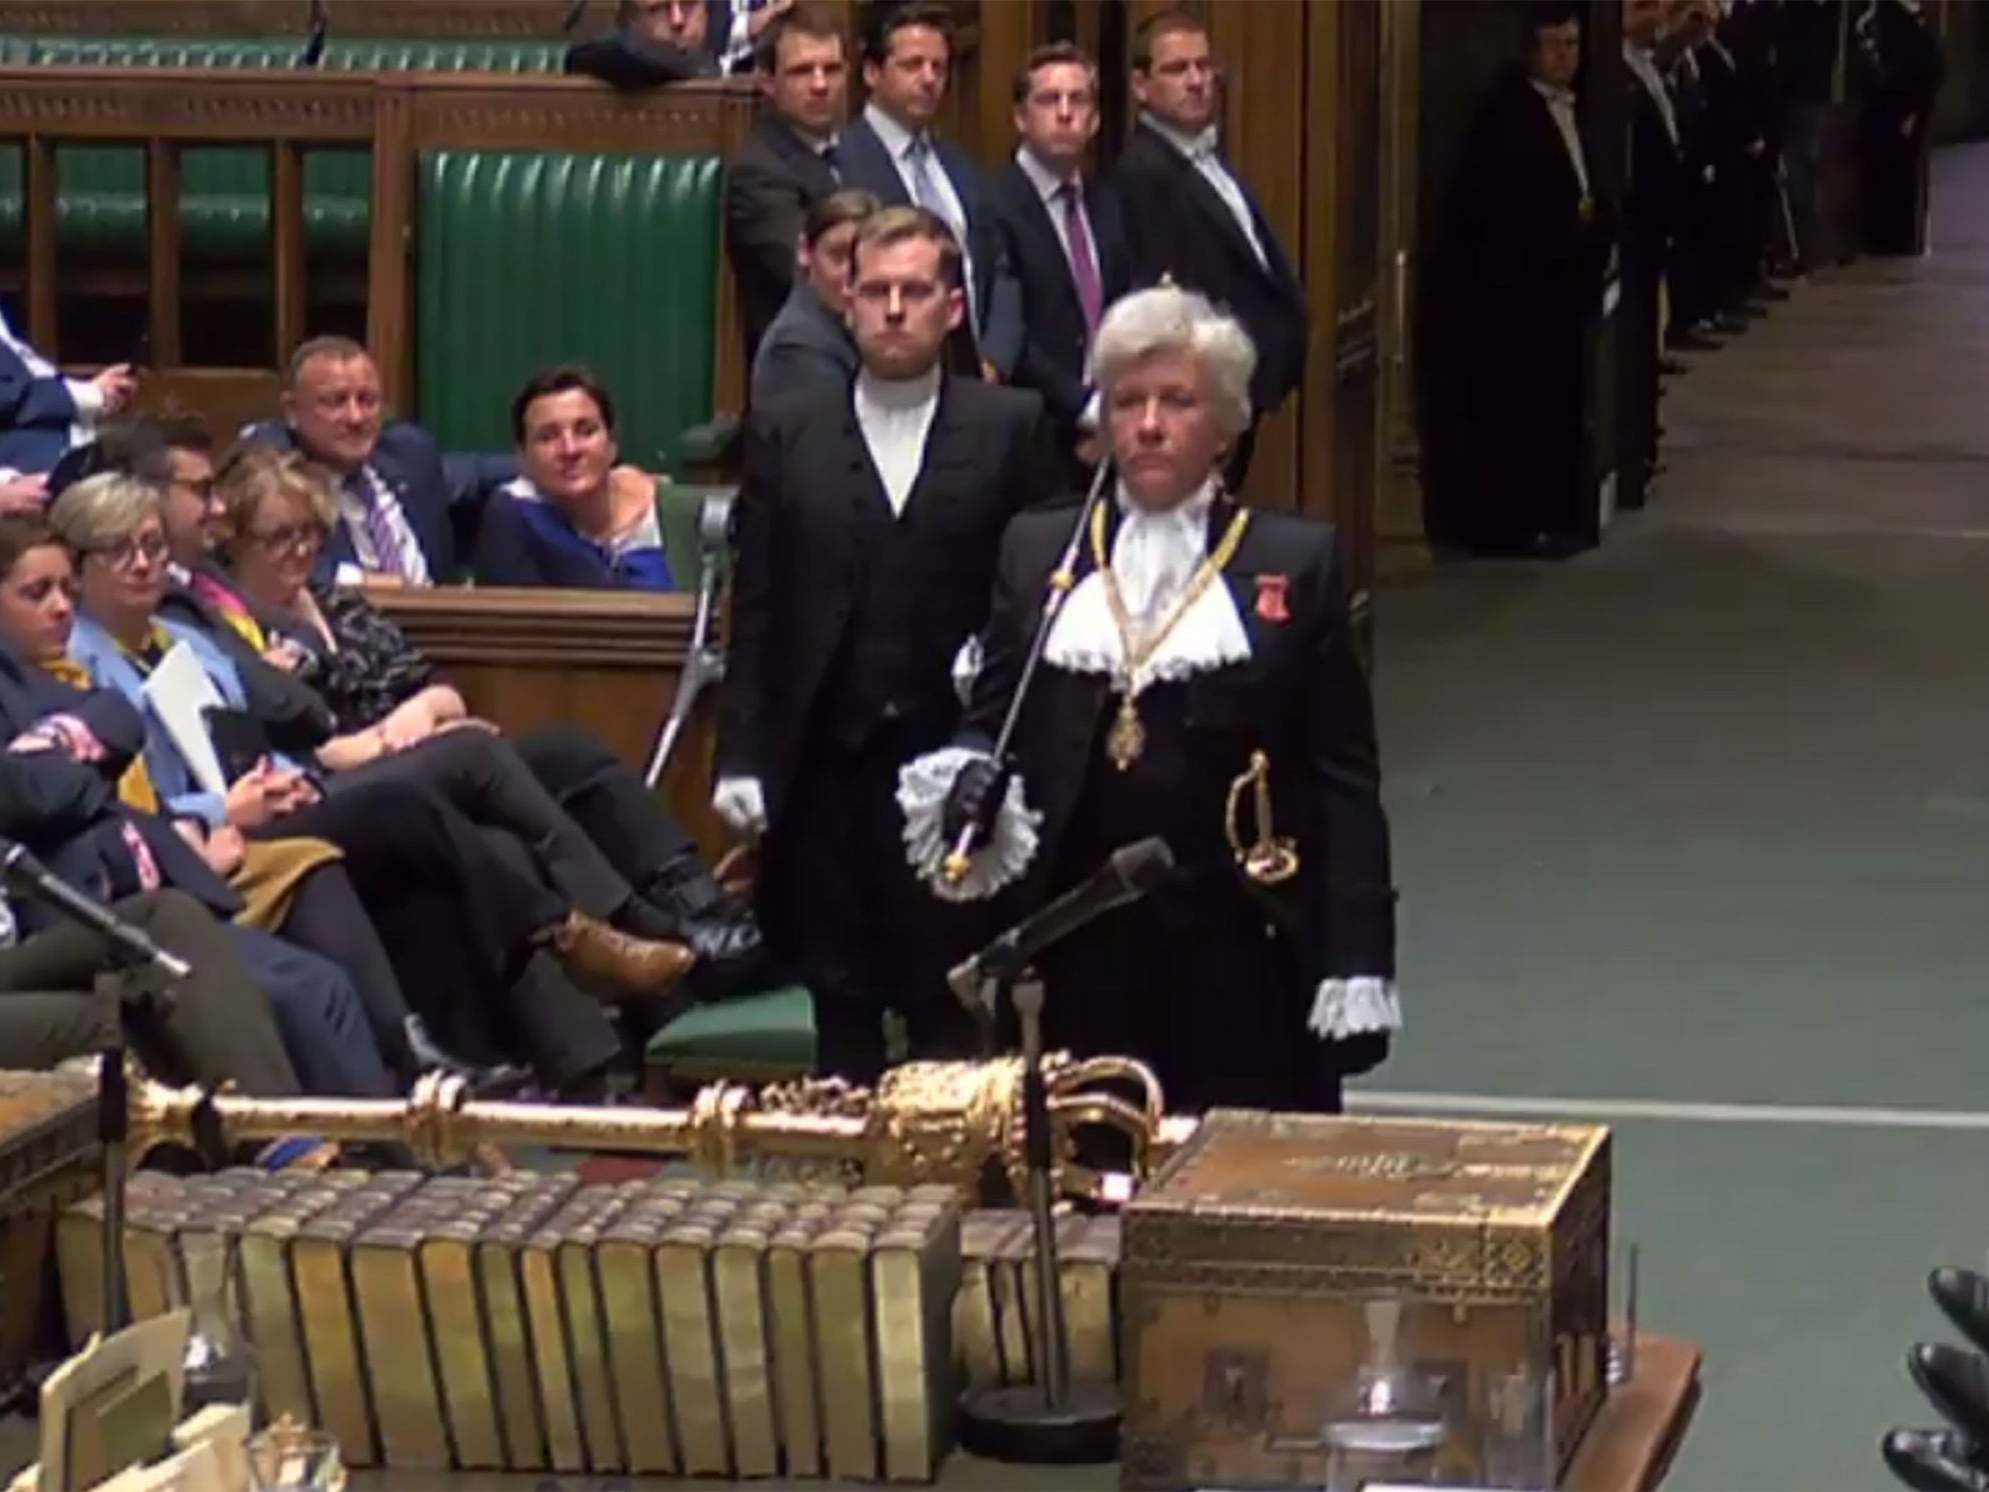 Black Rod enters the Commons during the ceremony to suspend parliament